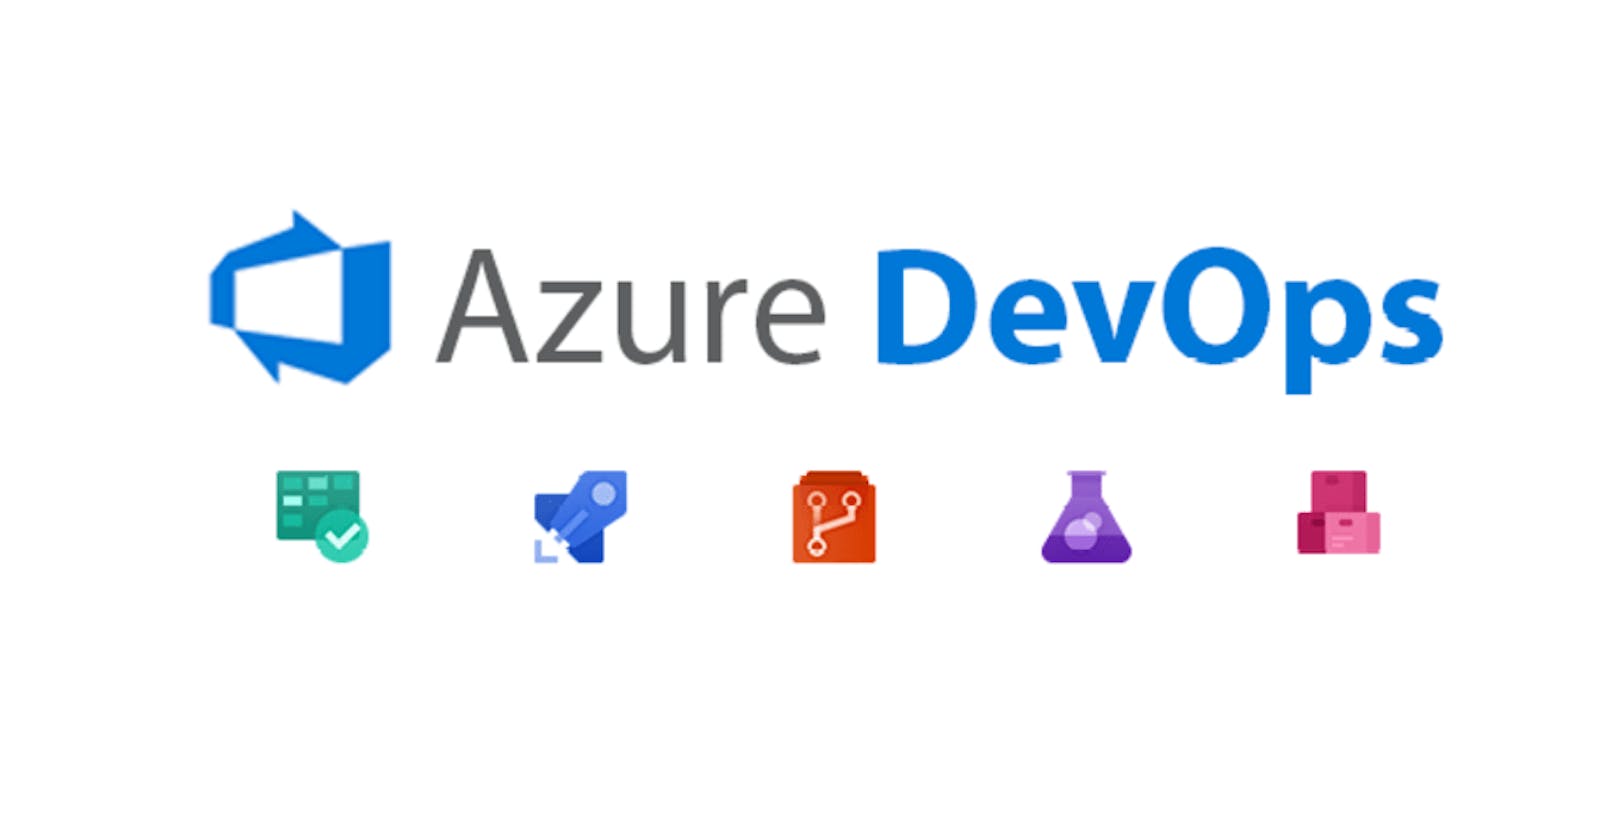 Understanding the directory structure created by Azure DevOps